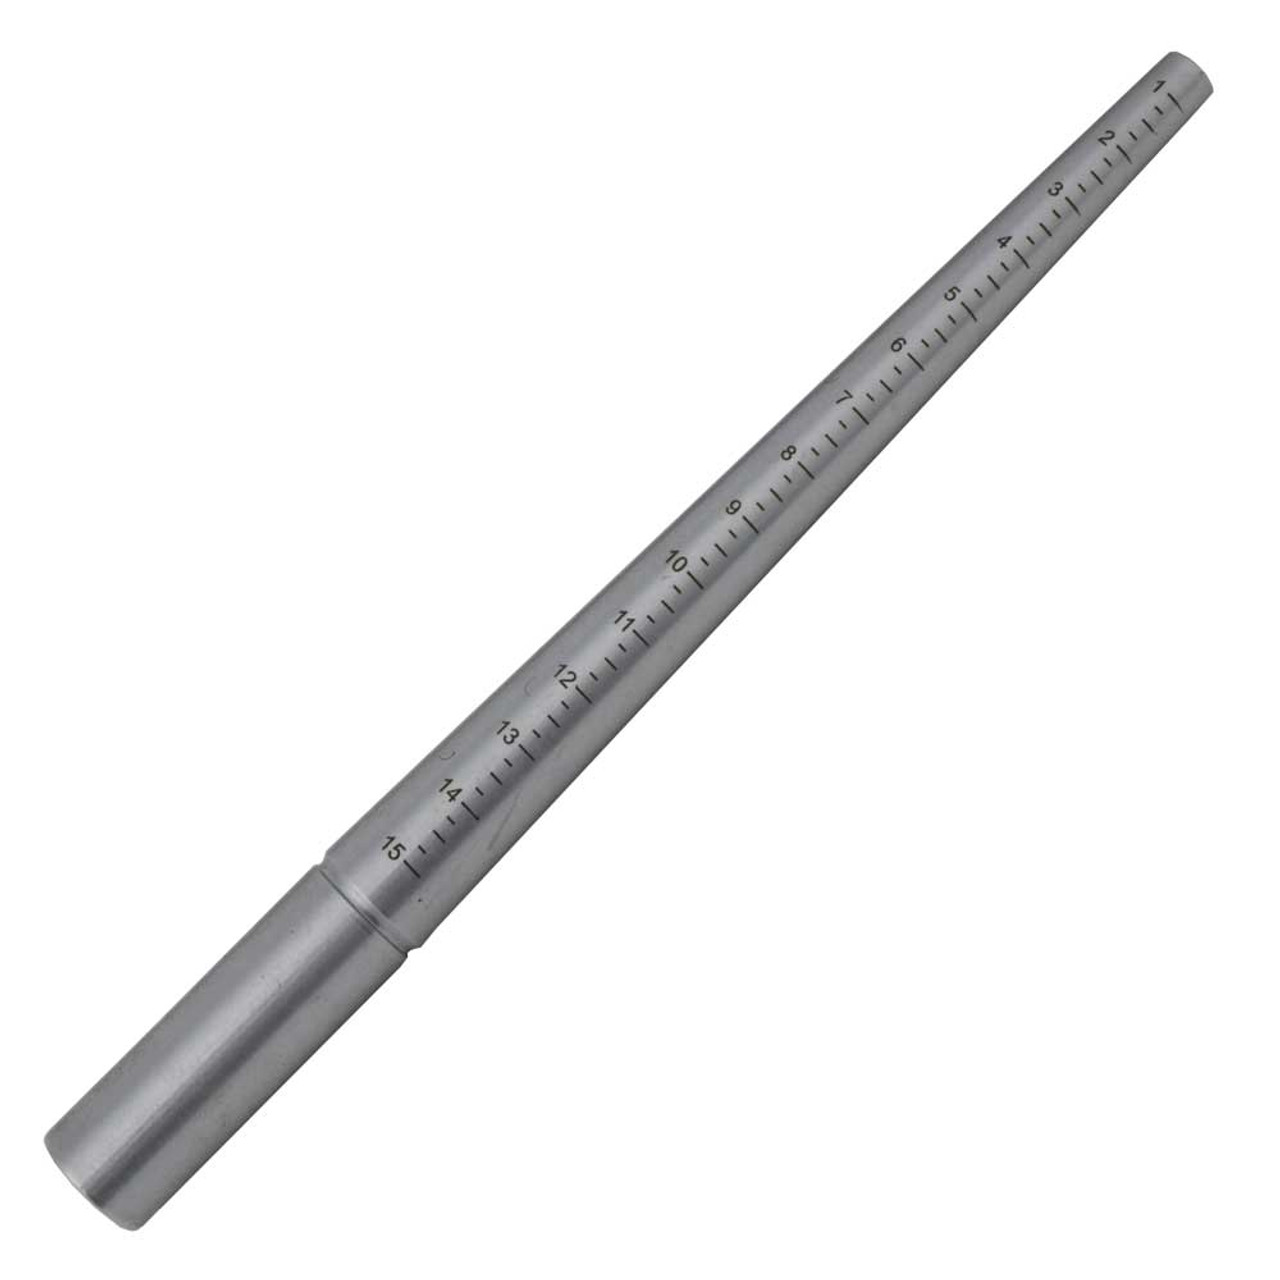 What Is A Ring Mandrel & How To Use It